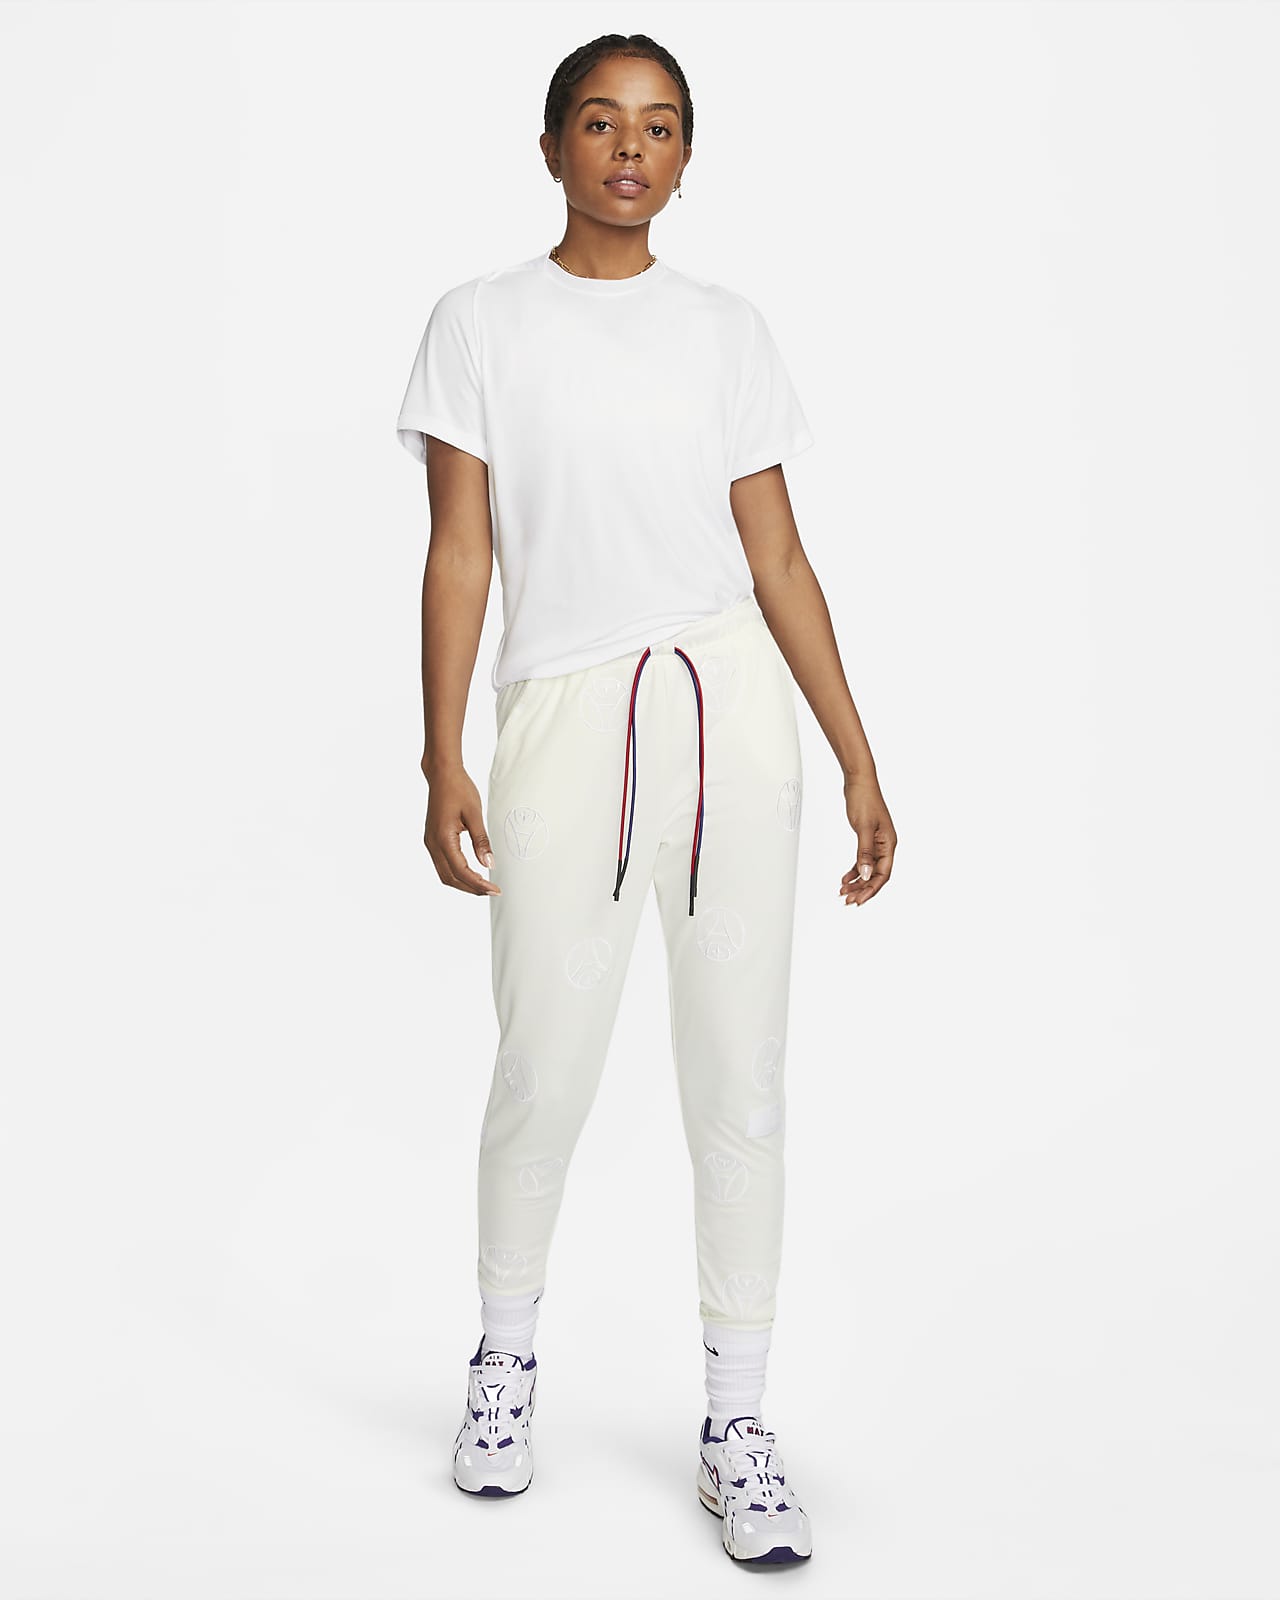 Womens' Superfly Athletic Pant, Women's Joggers & Sweatpants